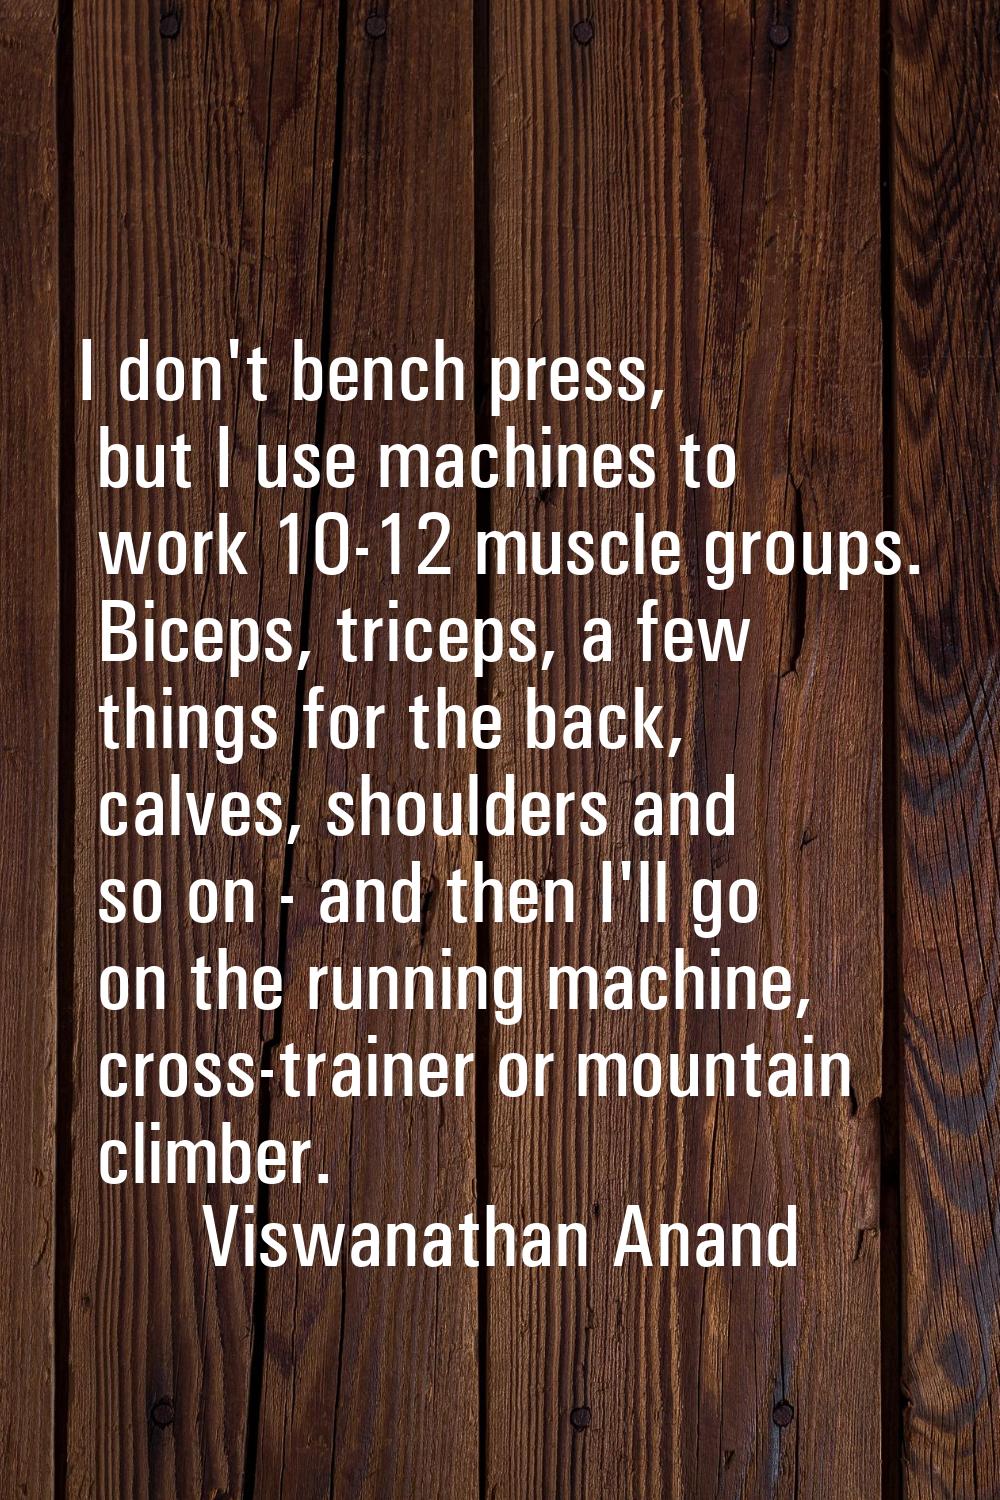 I don't bench press, but I use machines to work 10-12 muscle groups. Biceps, triceps, a few things 